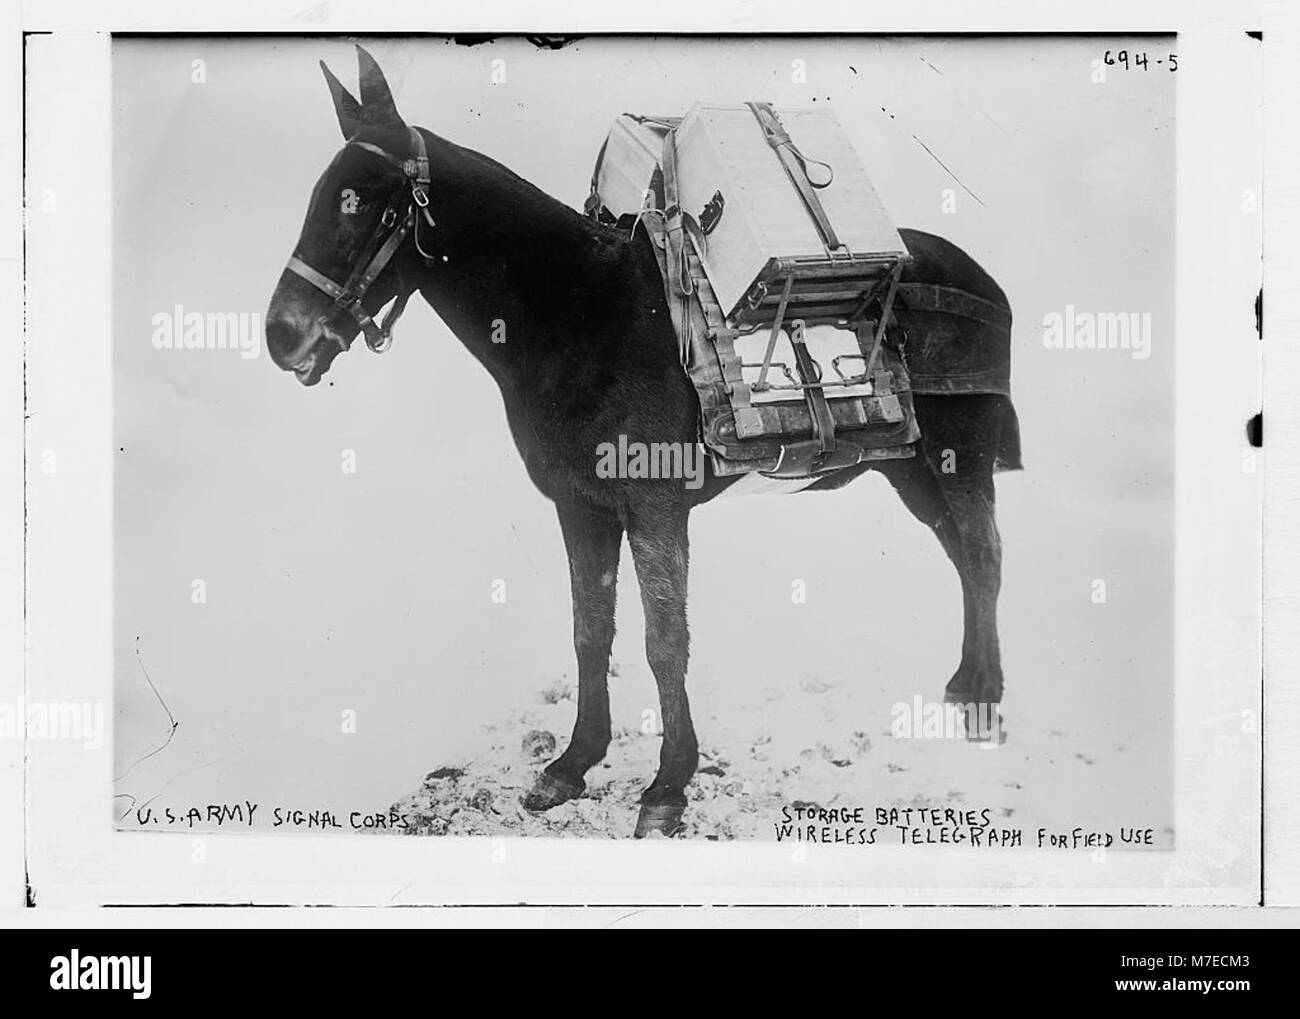 Pack Mule Illustration High Resolution Stock Photography and Images - Alamy